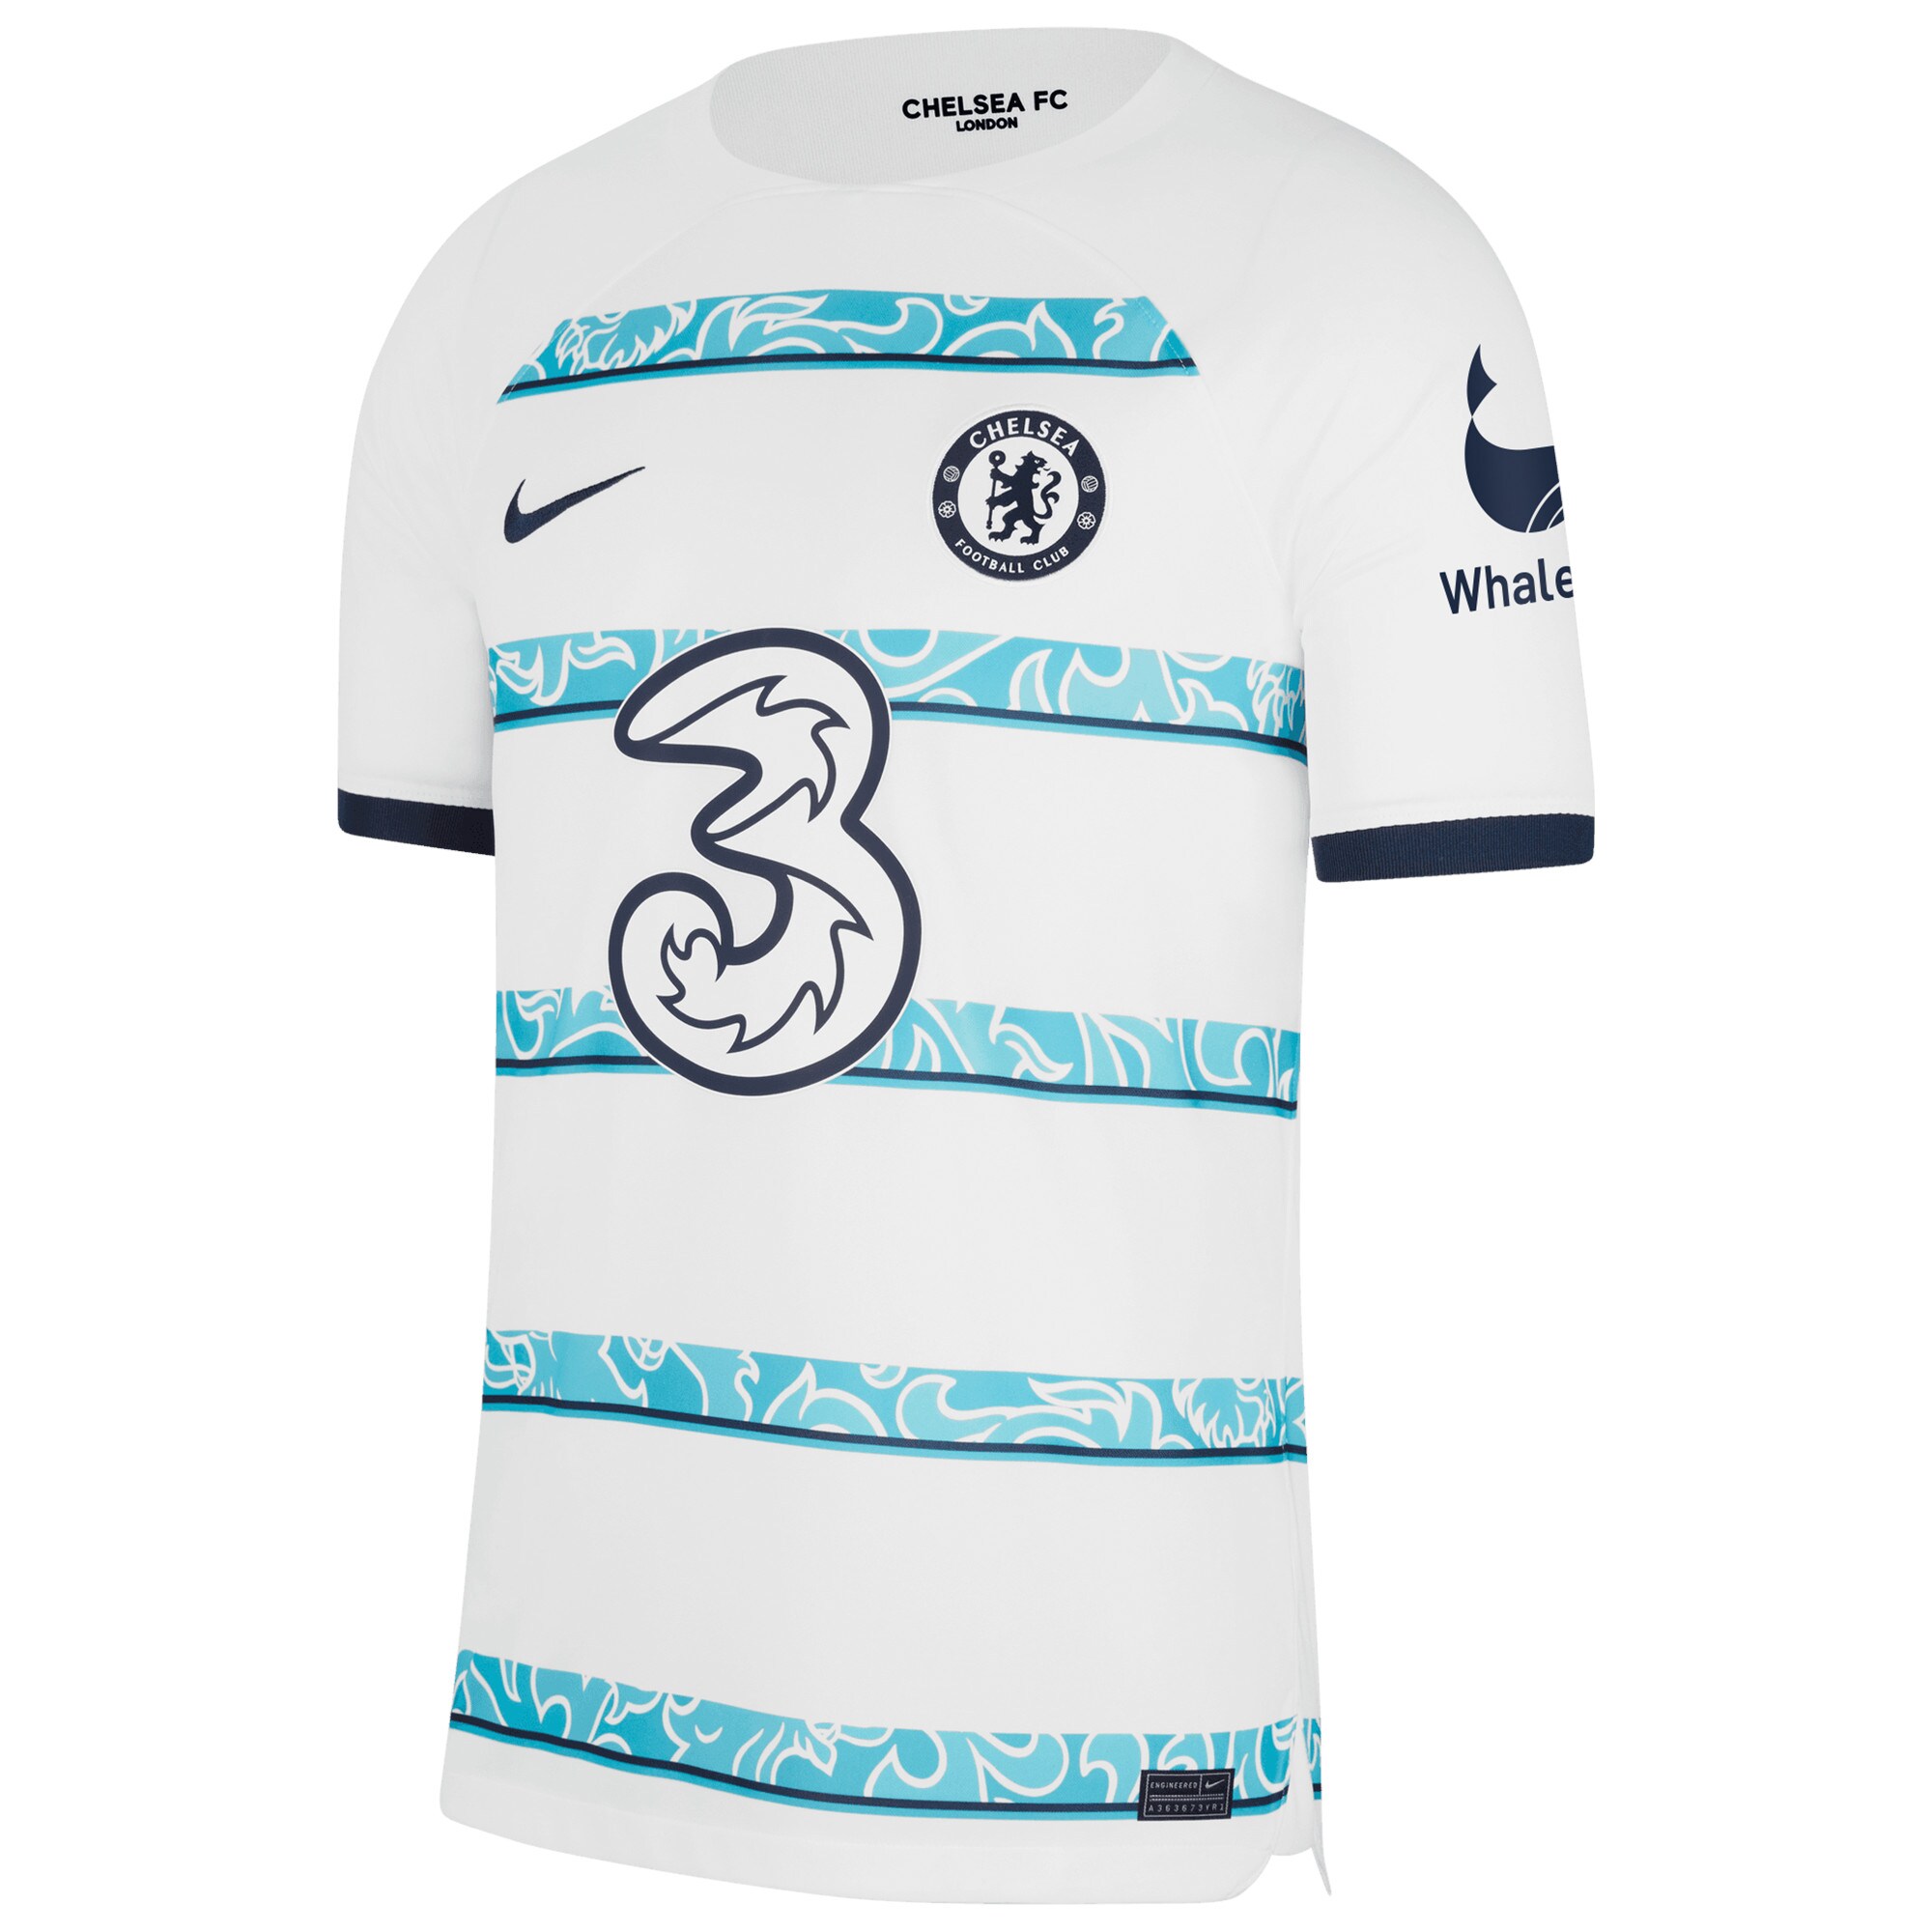 Chelsea Cup Away Stadium Shirt 2022-23 with England 9 printing